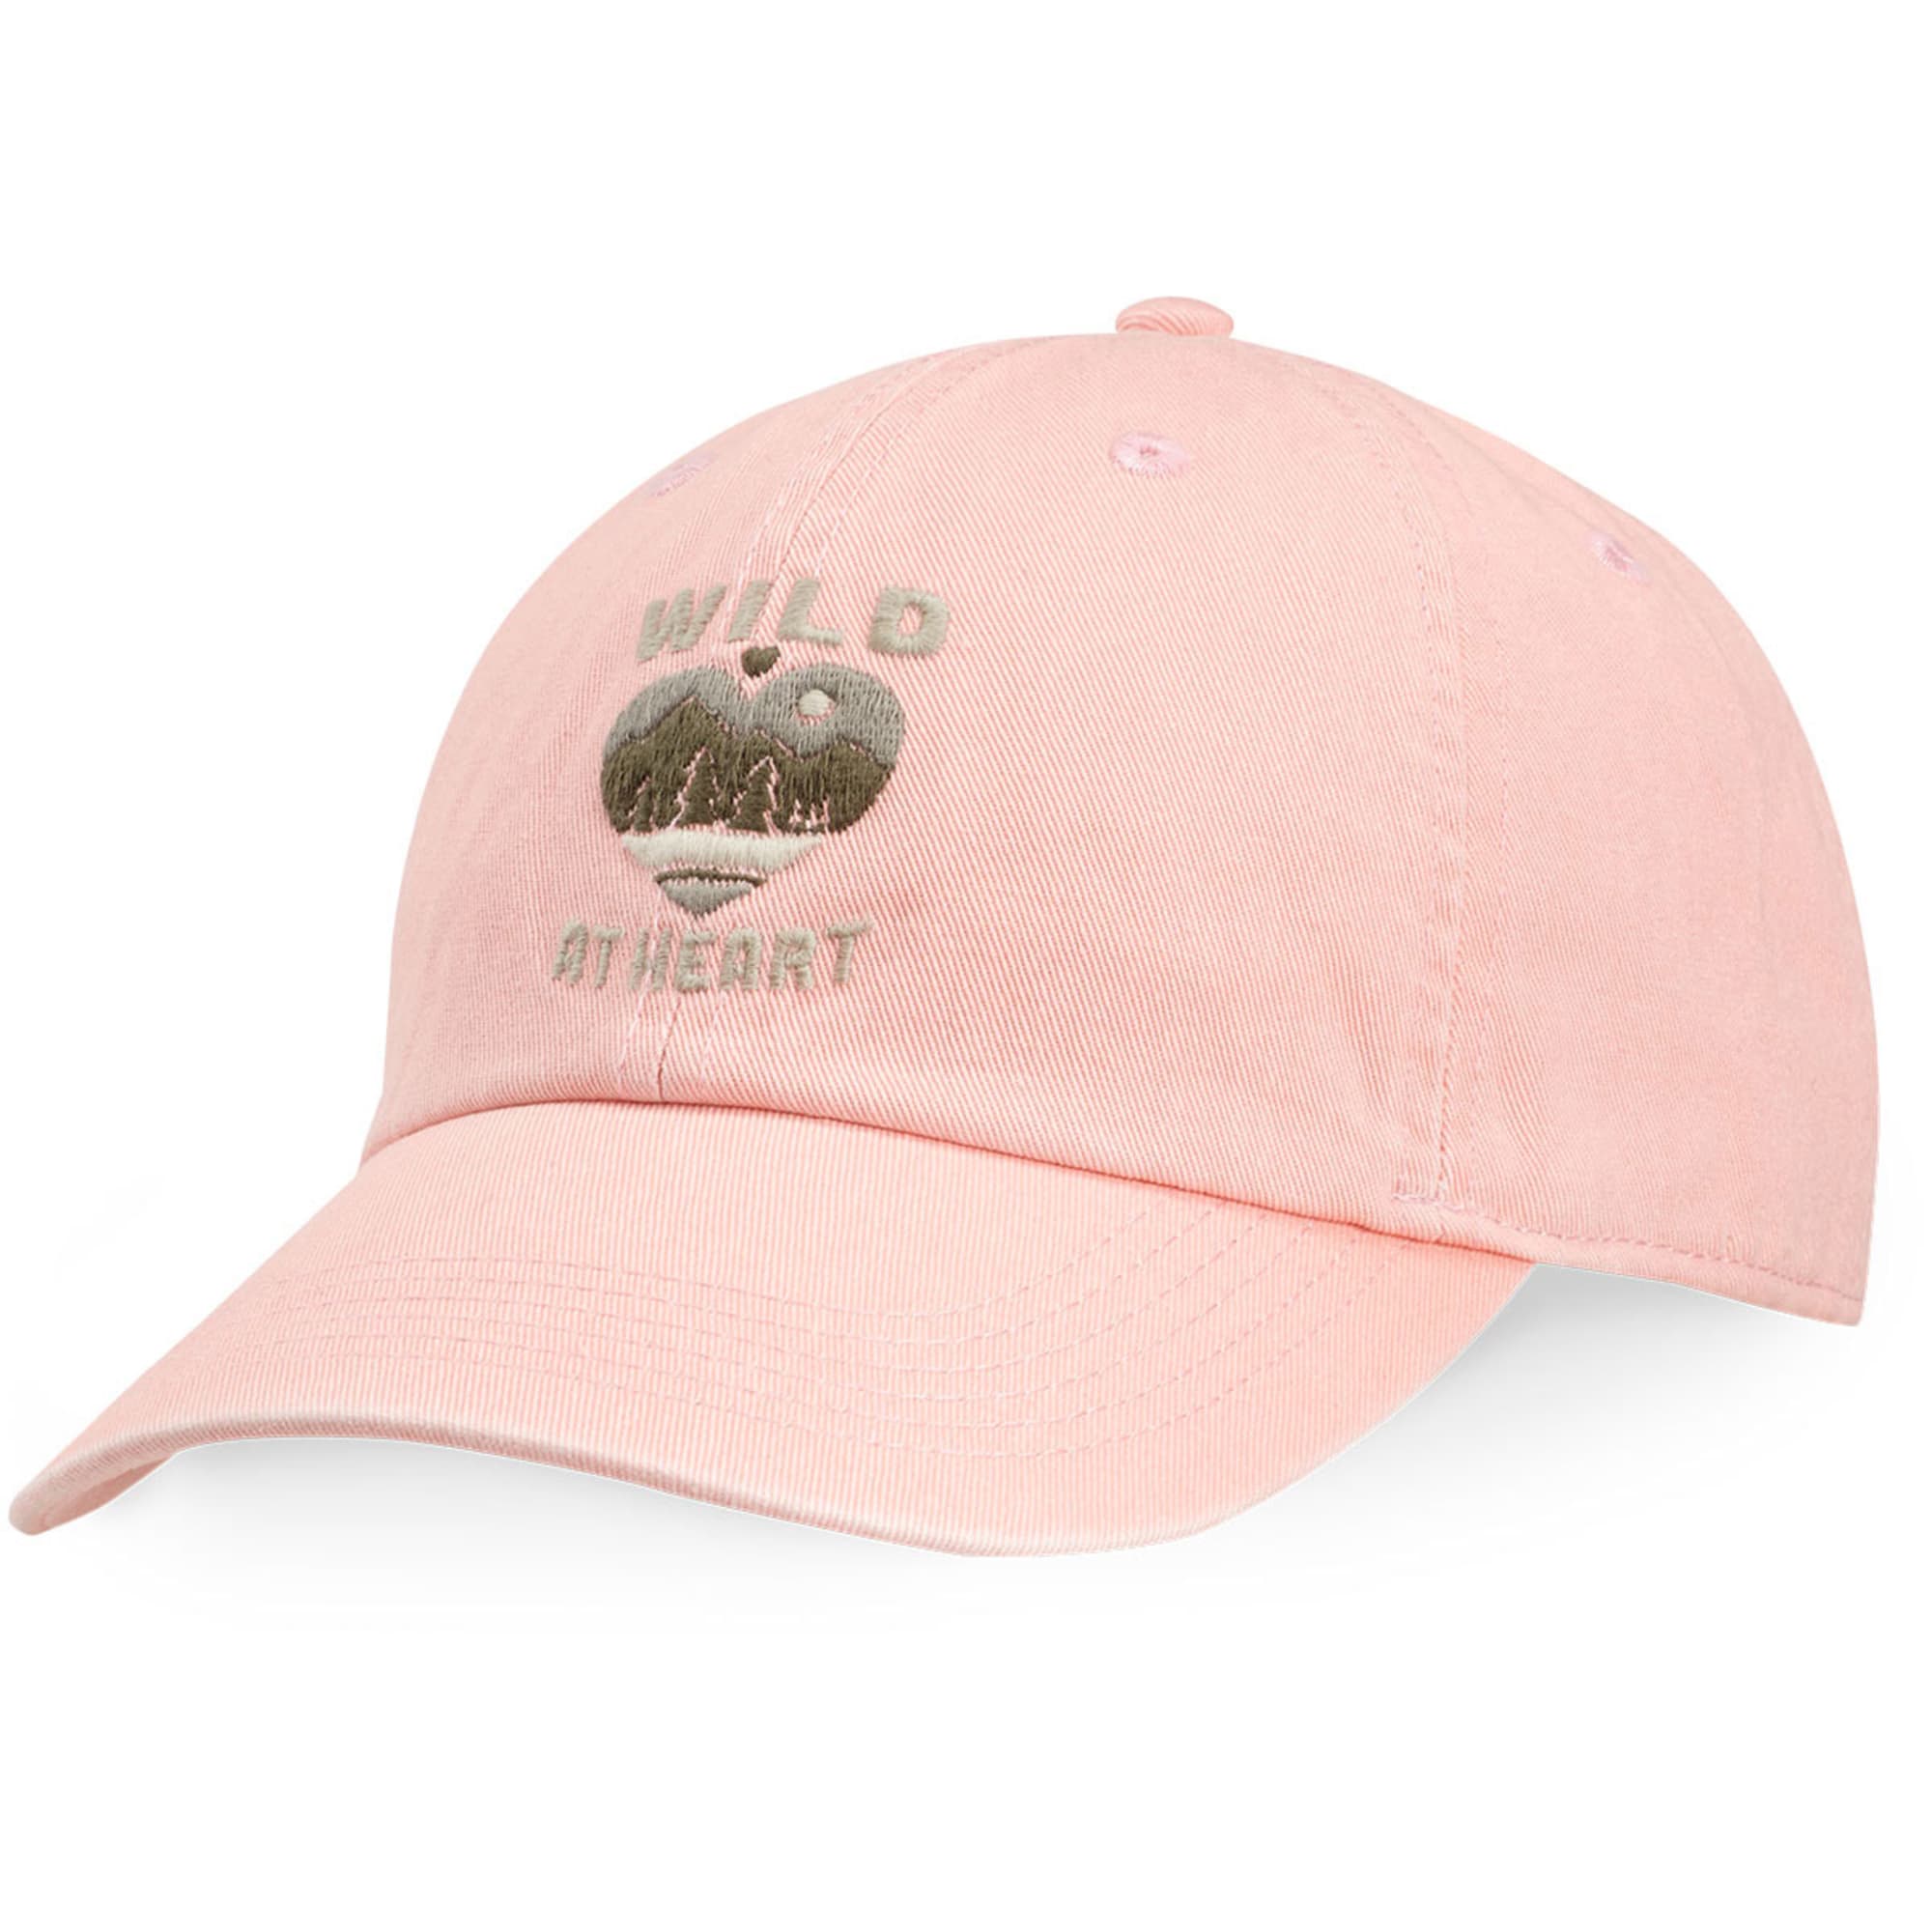 LIFE IS GOOD Women's Dragonfly Chill Cap - Bob's Stores